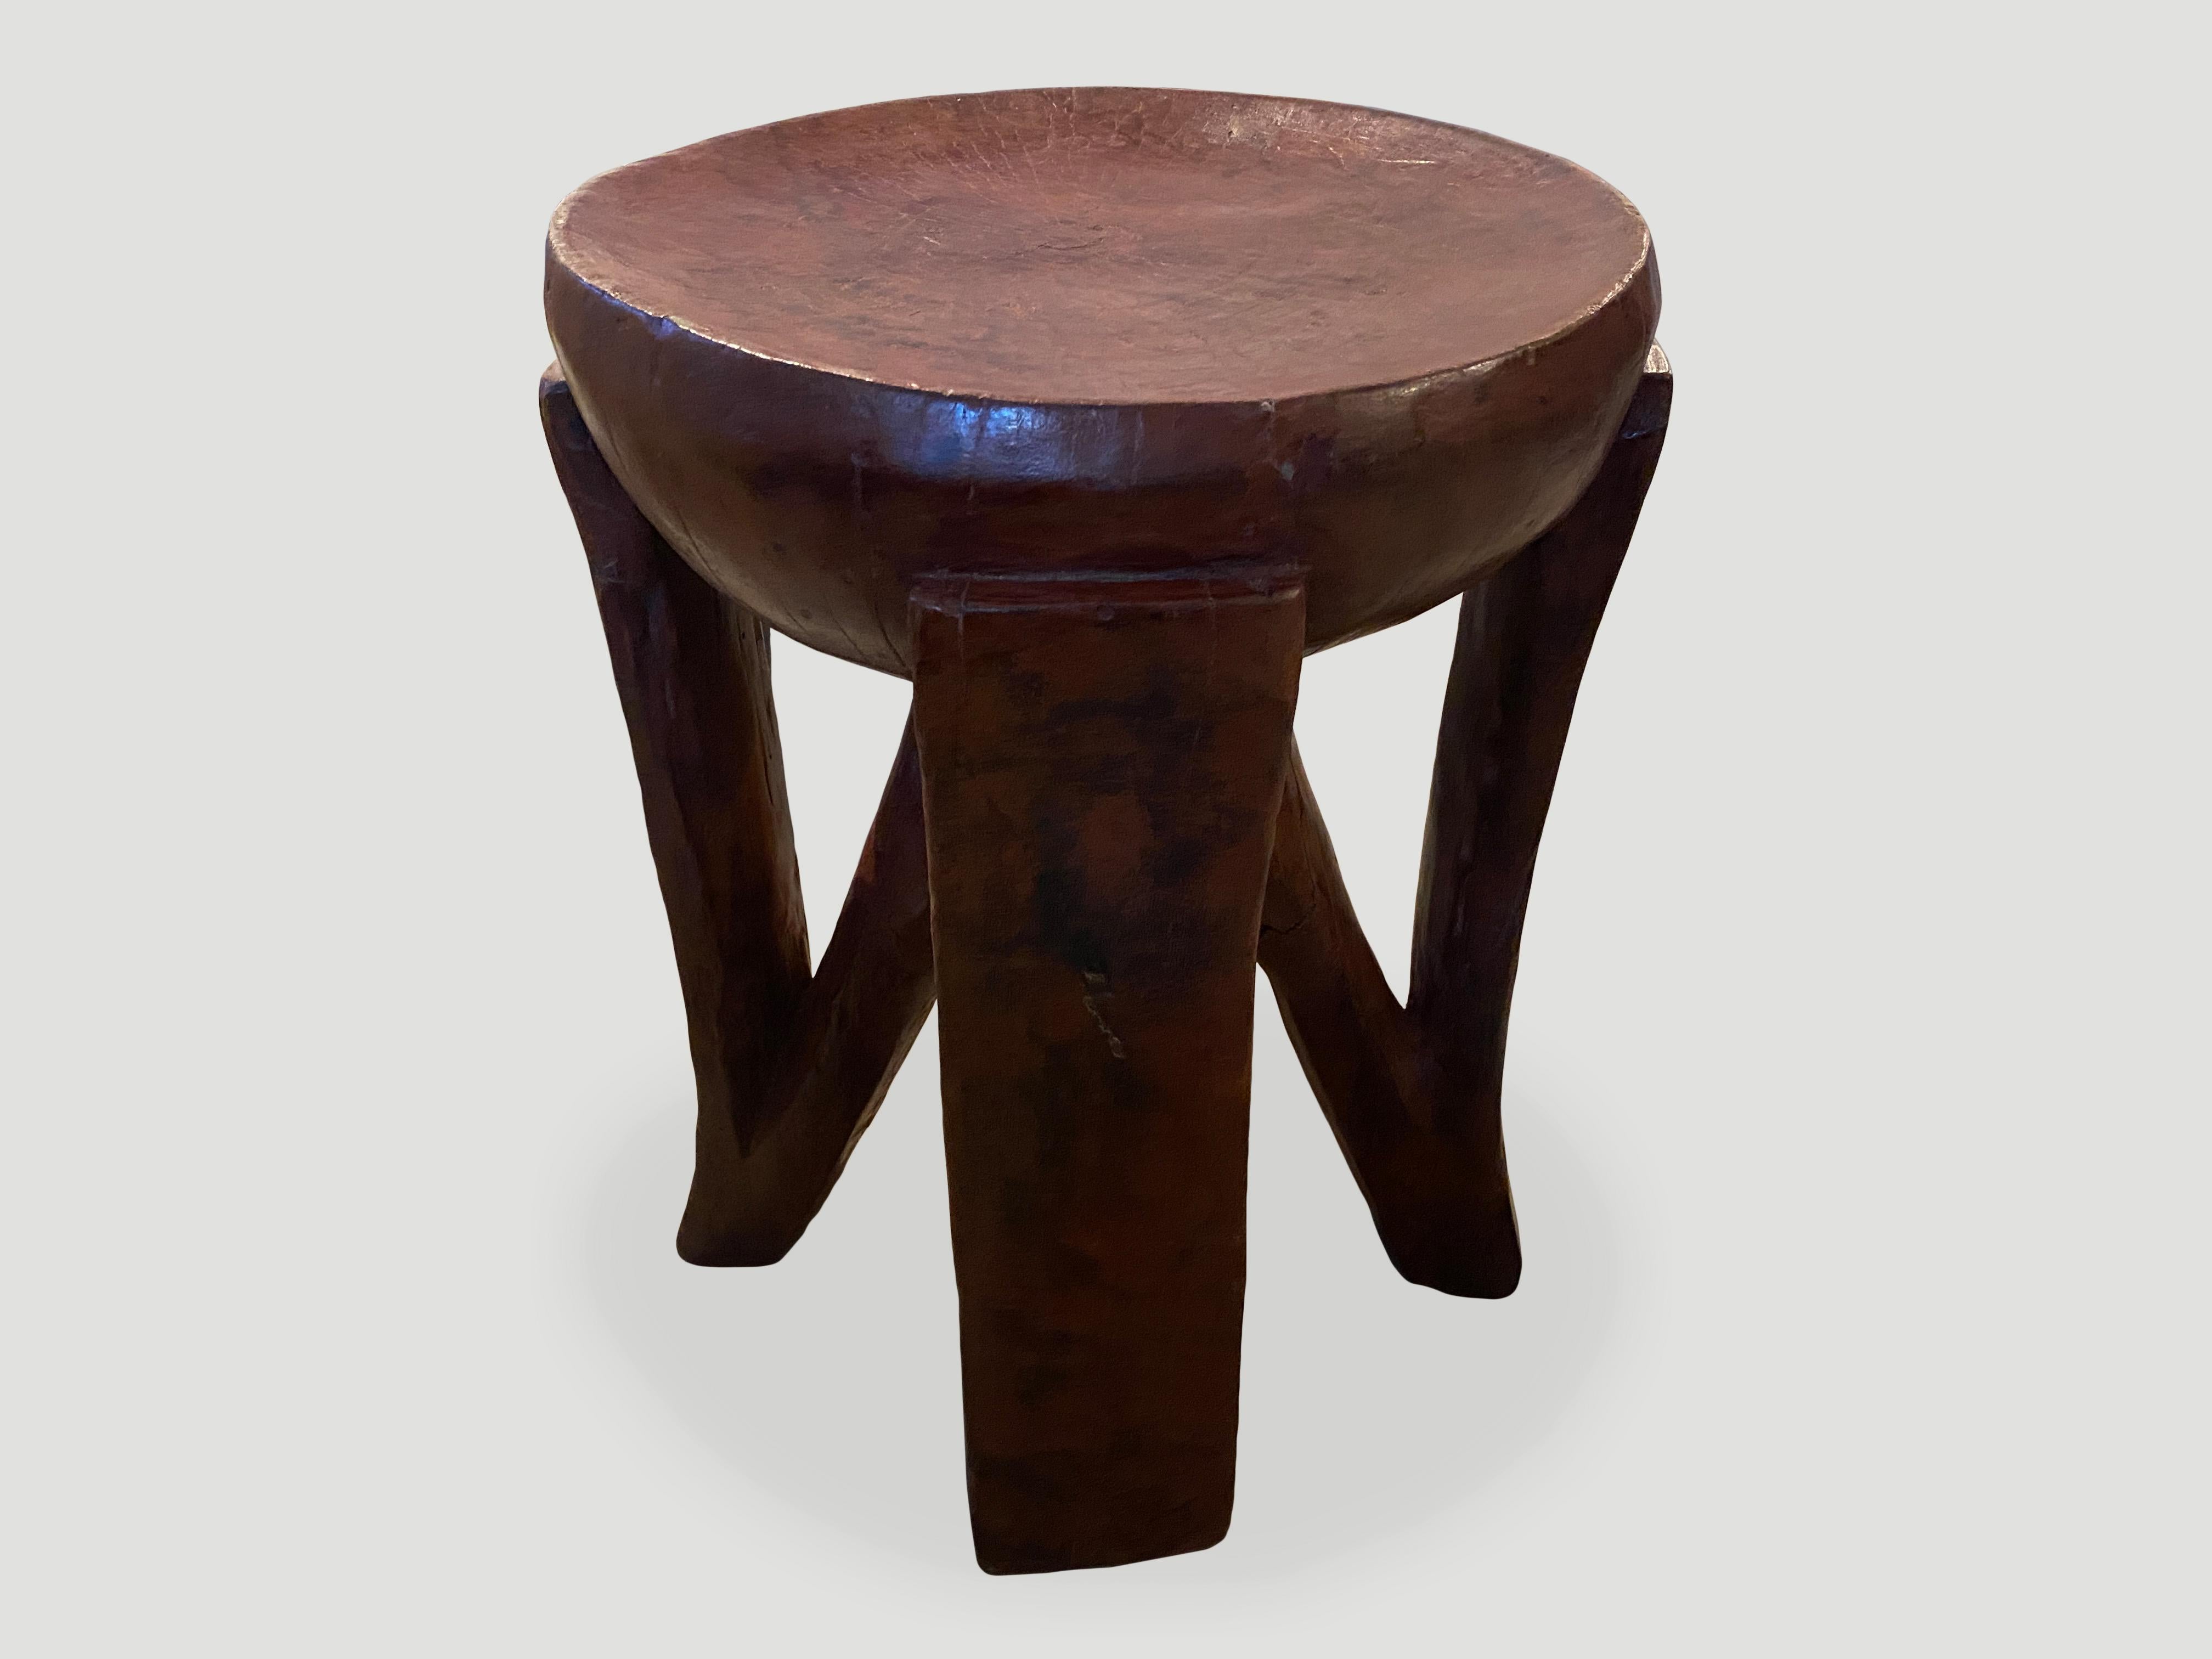 Ivorian Andrianna Shamaris Antique African Side Table or Stool